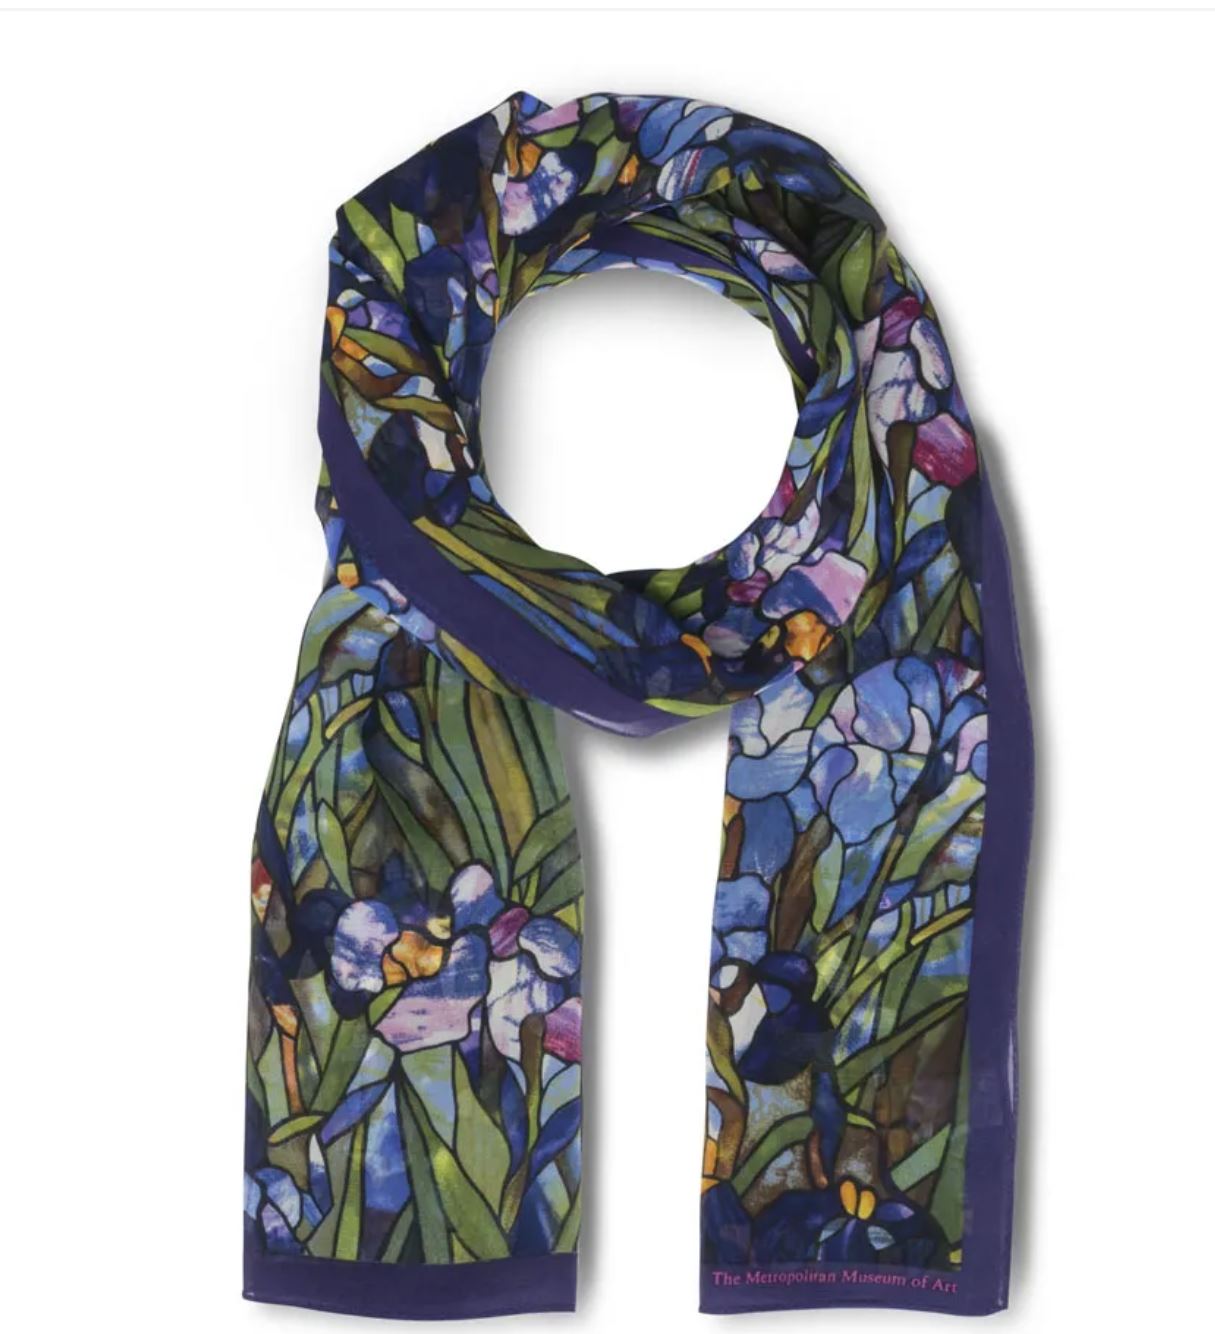  Online Shopping Discount - The Metropolitan Museum  Of Art Louis C. Tiffany Irises Oblong Silk Scarf Outlet Rings Store -  Outlet Rings Store